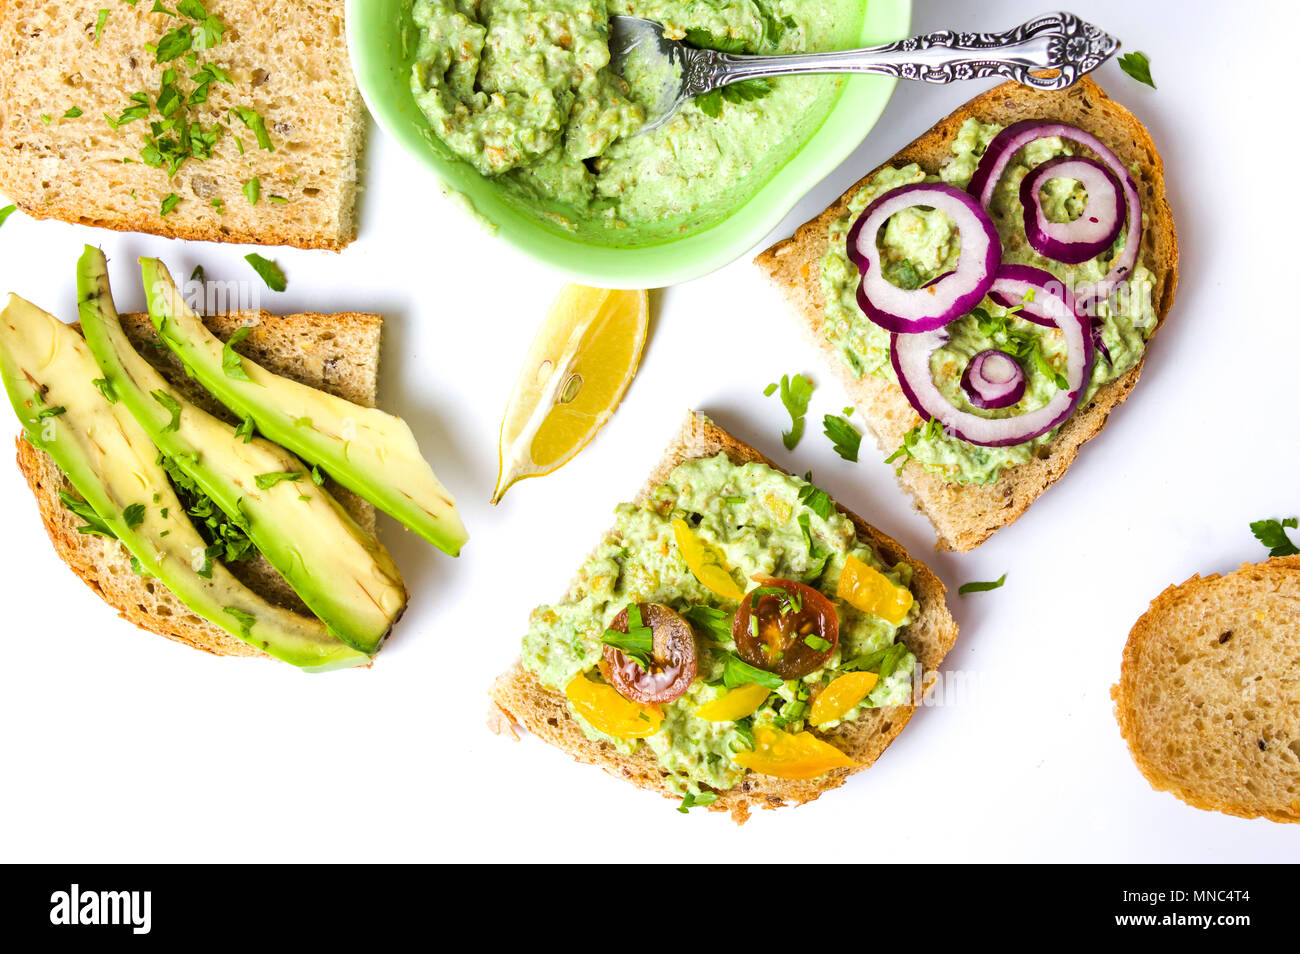 Healthy sandwiches with avocado and vegetables for a diet snack Stock Photo